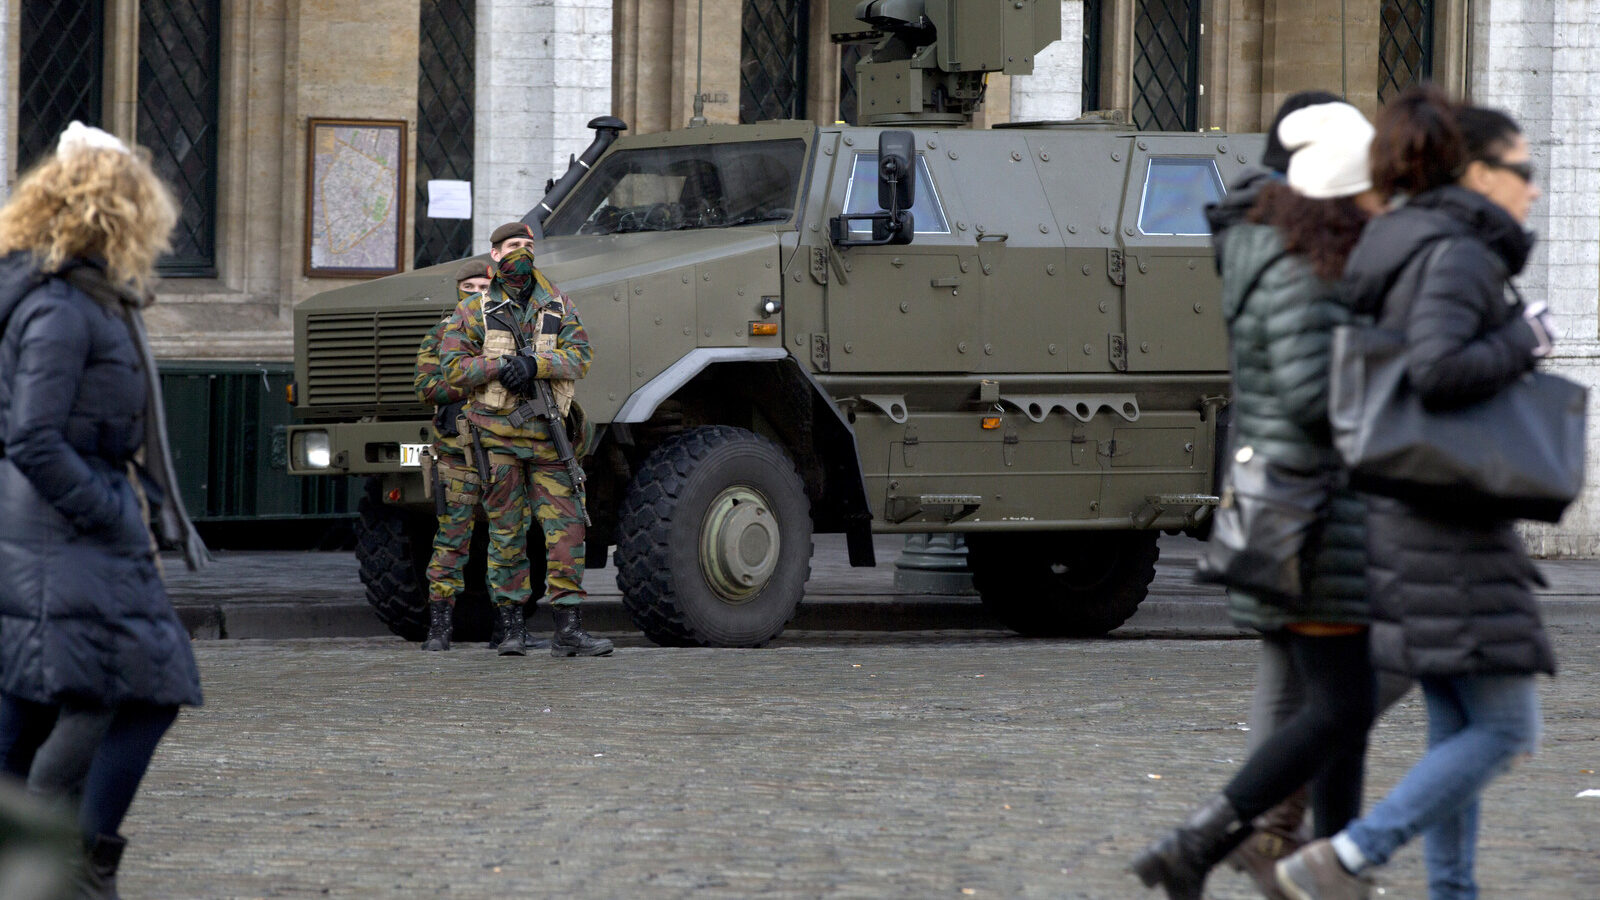 People walk as Belgian Army soldiers patrol in the historic Grand Place in the center of Brussels on Monday, Nov. 23, 2015. The Belgian capital Brussels has entered its third day of lockdown, with schools and underground transport shut and more than 1,000 security personnel deployed across the country. (AP Photo/Virginia Mayo)